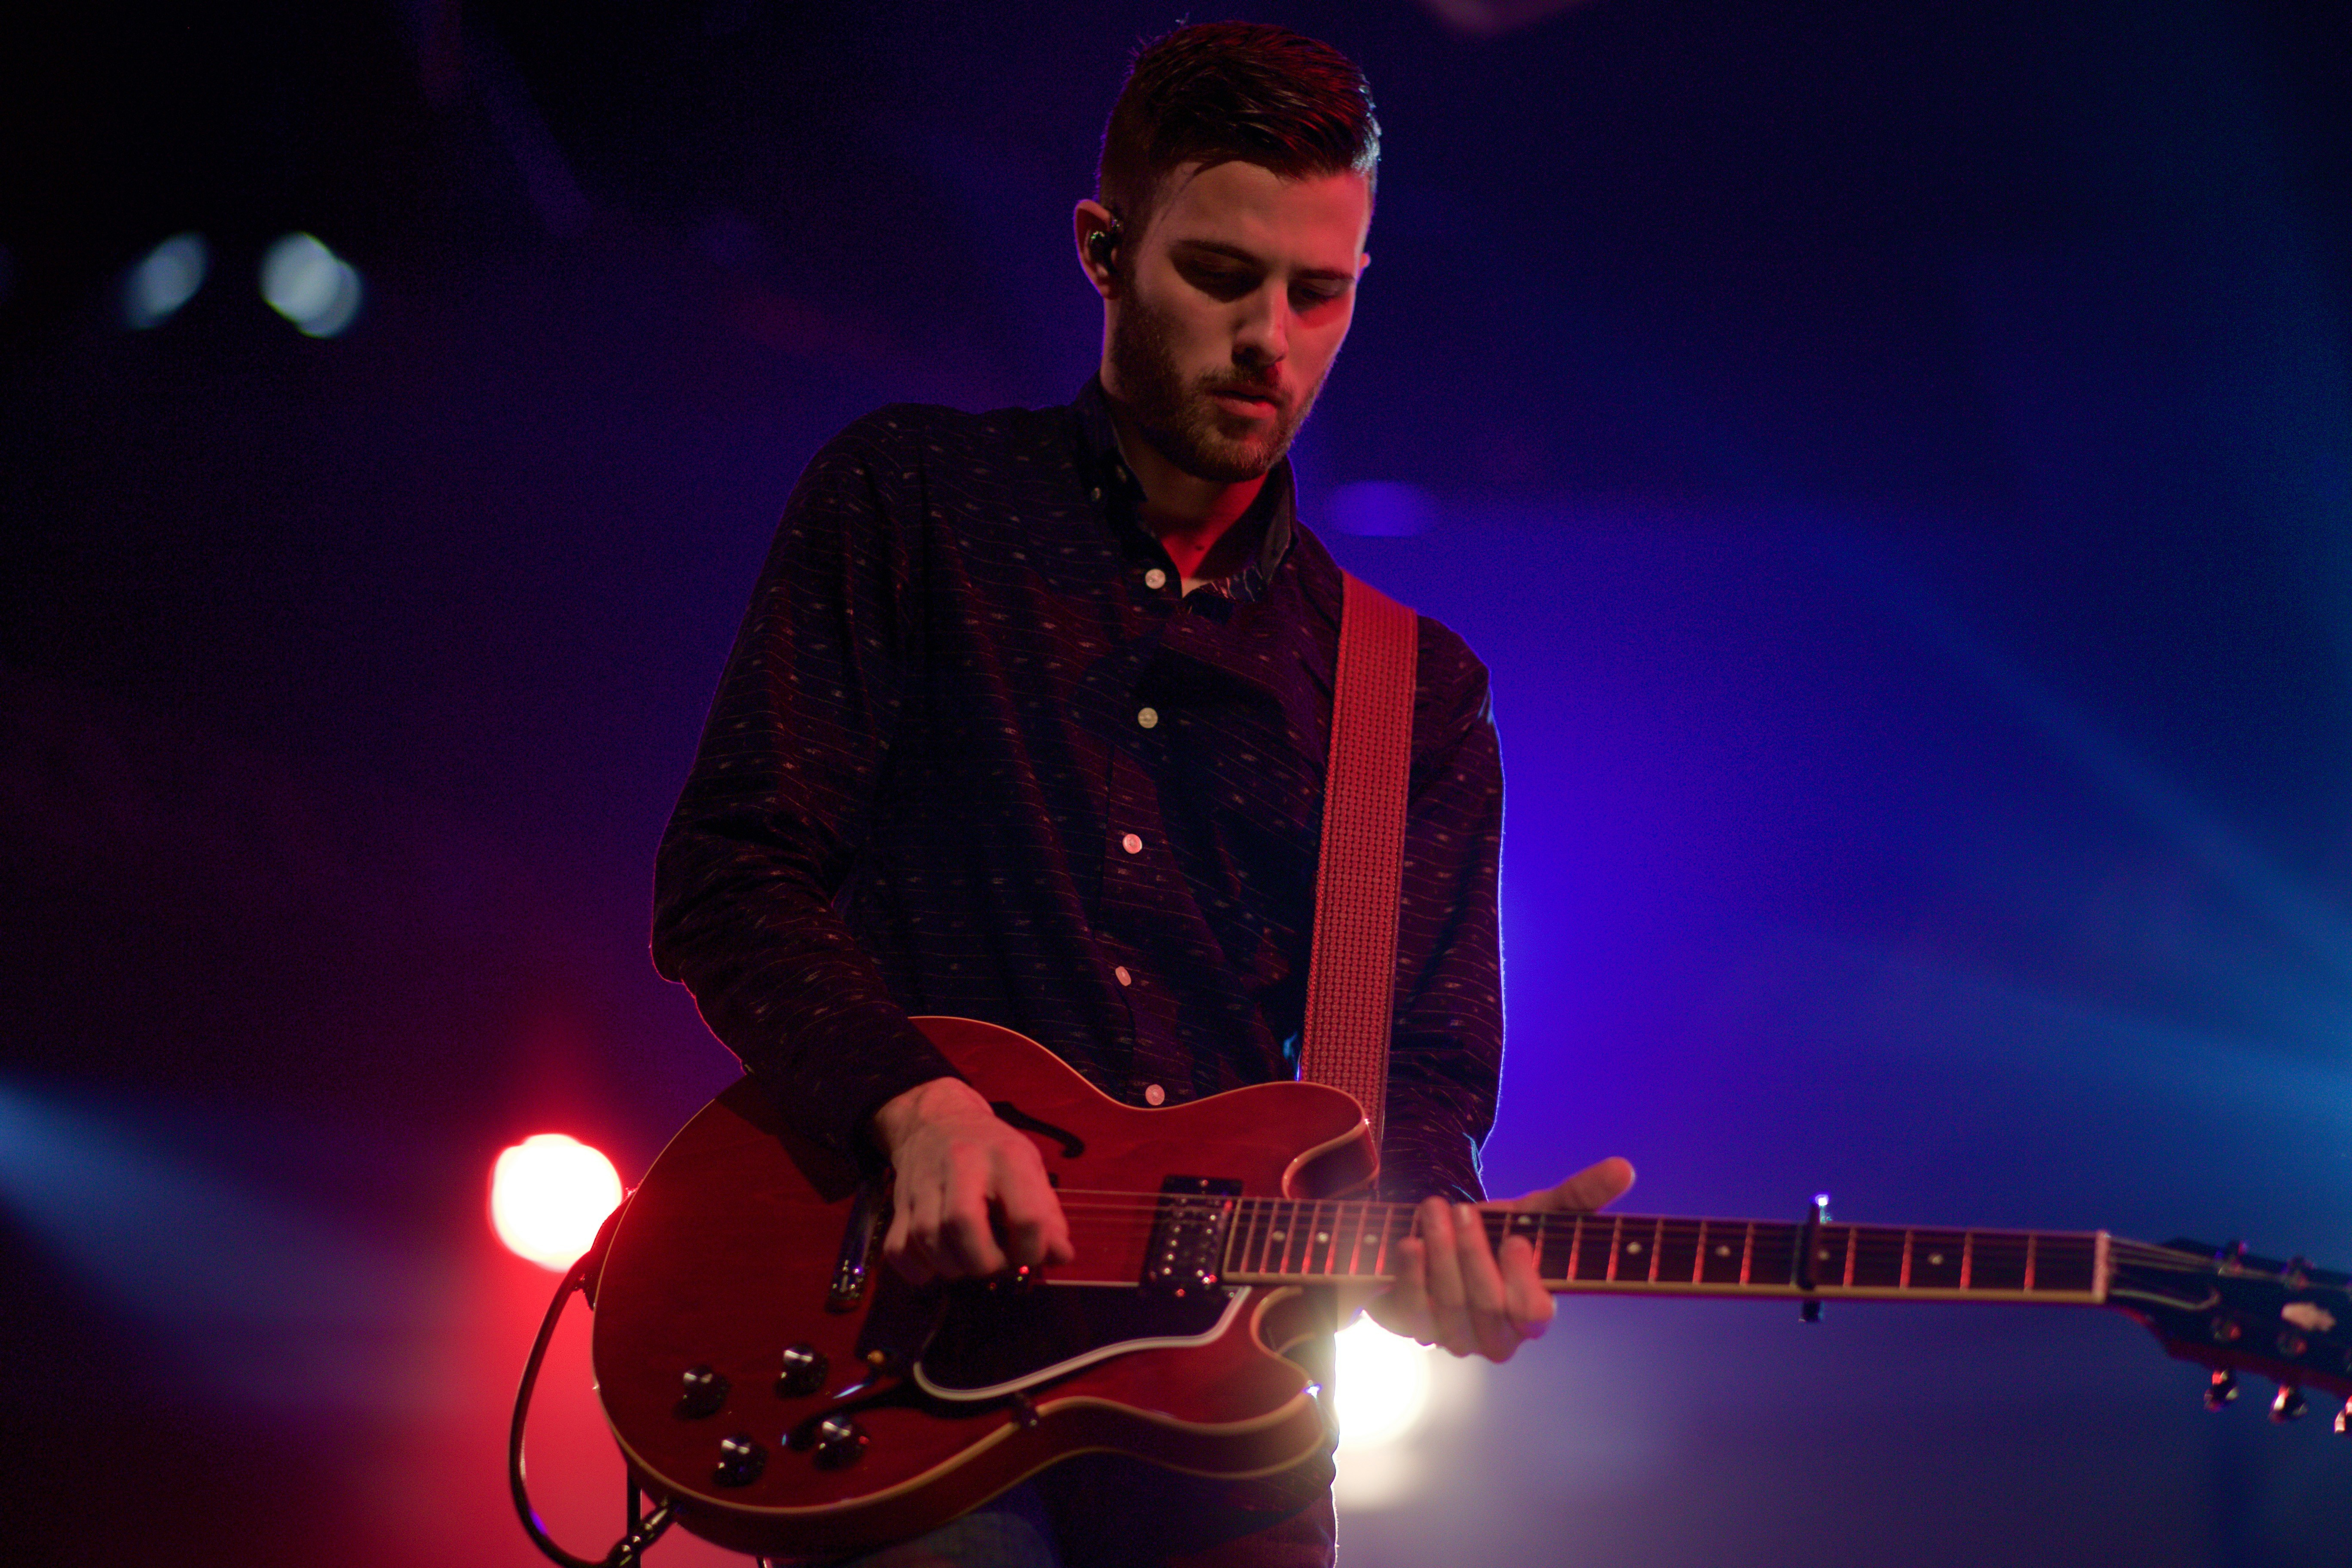 Guitarist on stage with blue and red lights